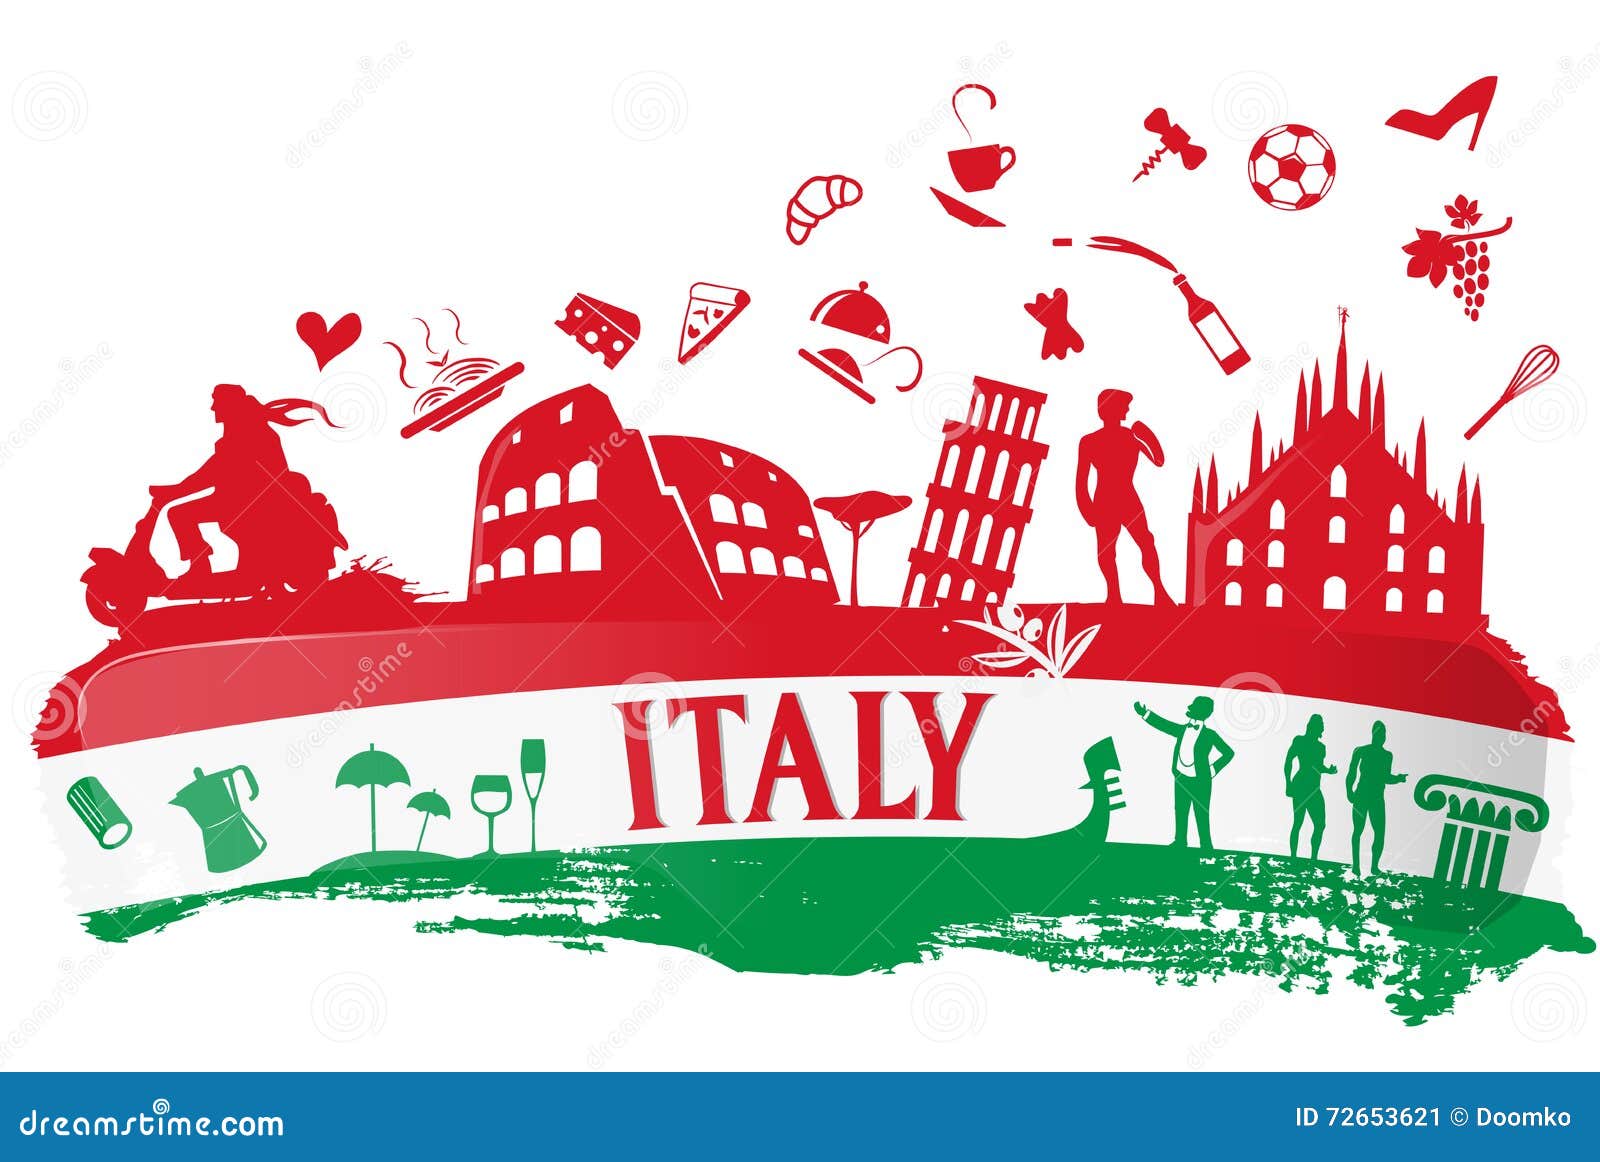 italian background with silhouette  set